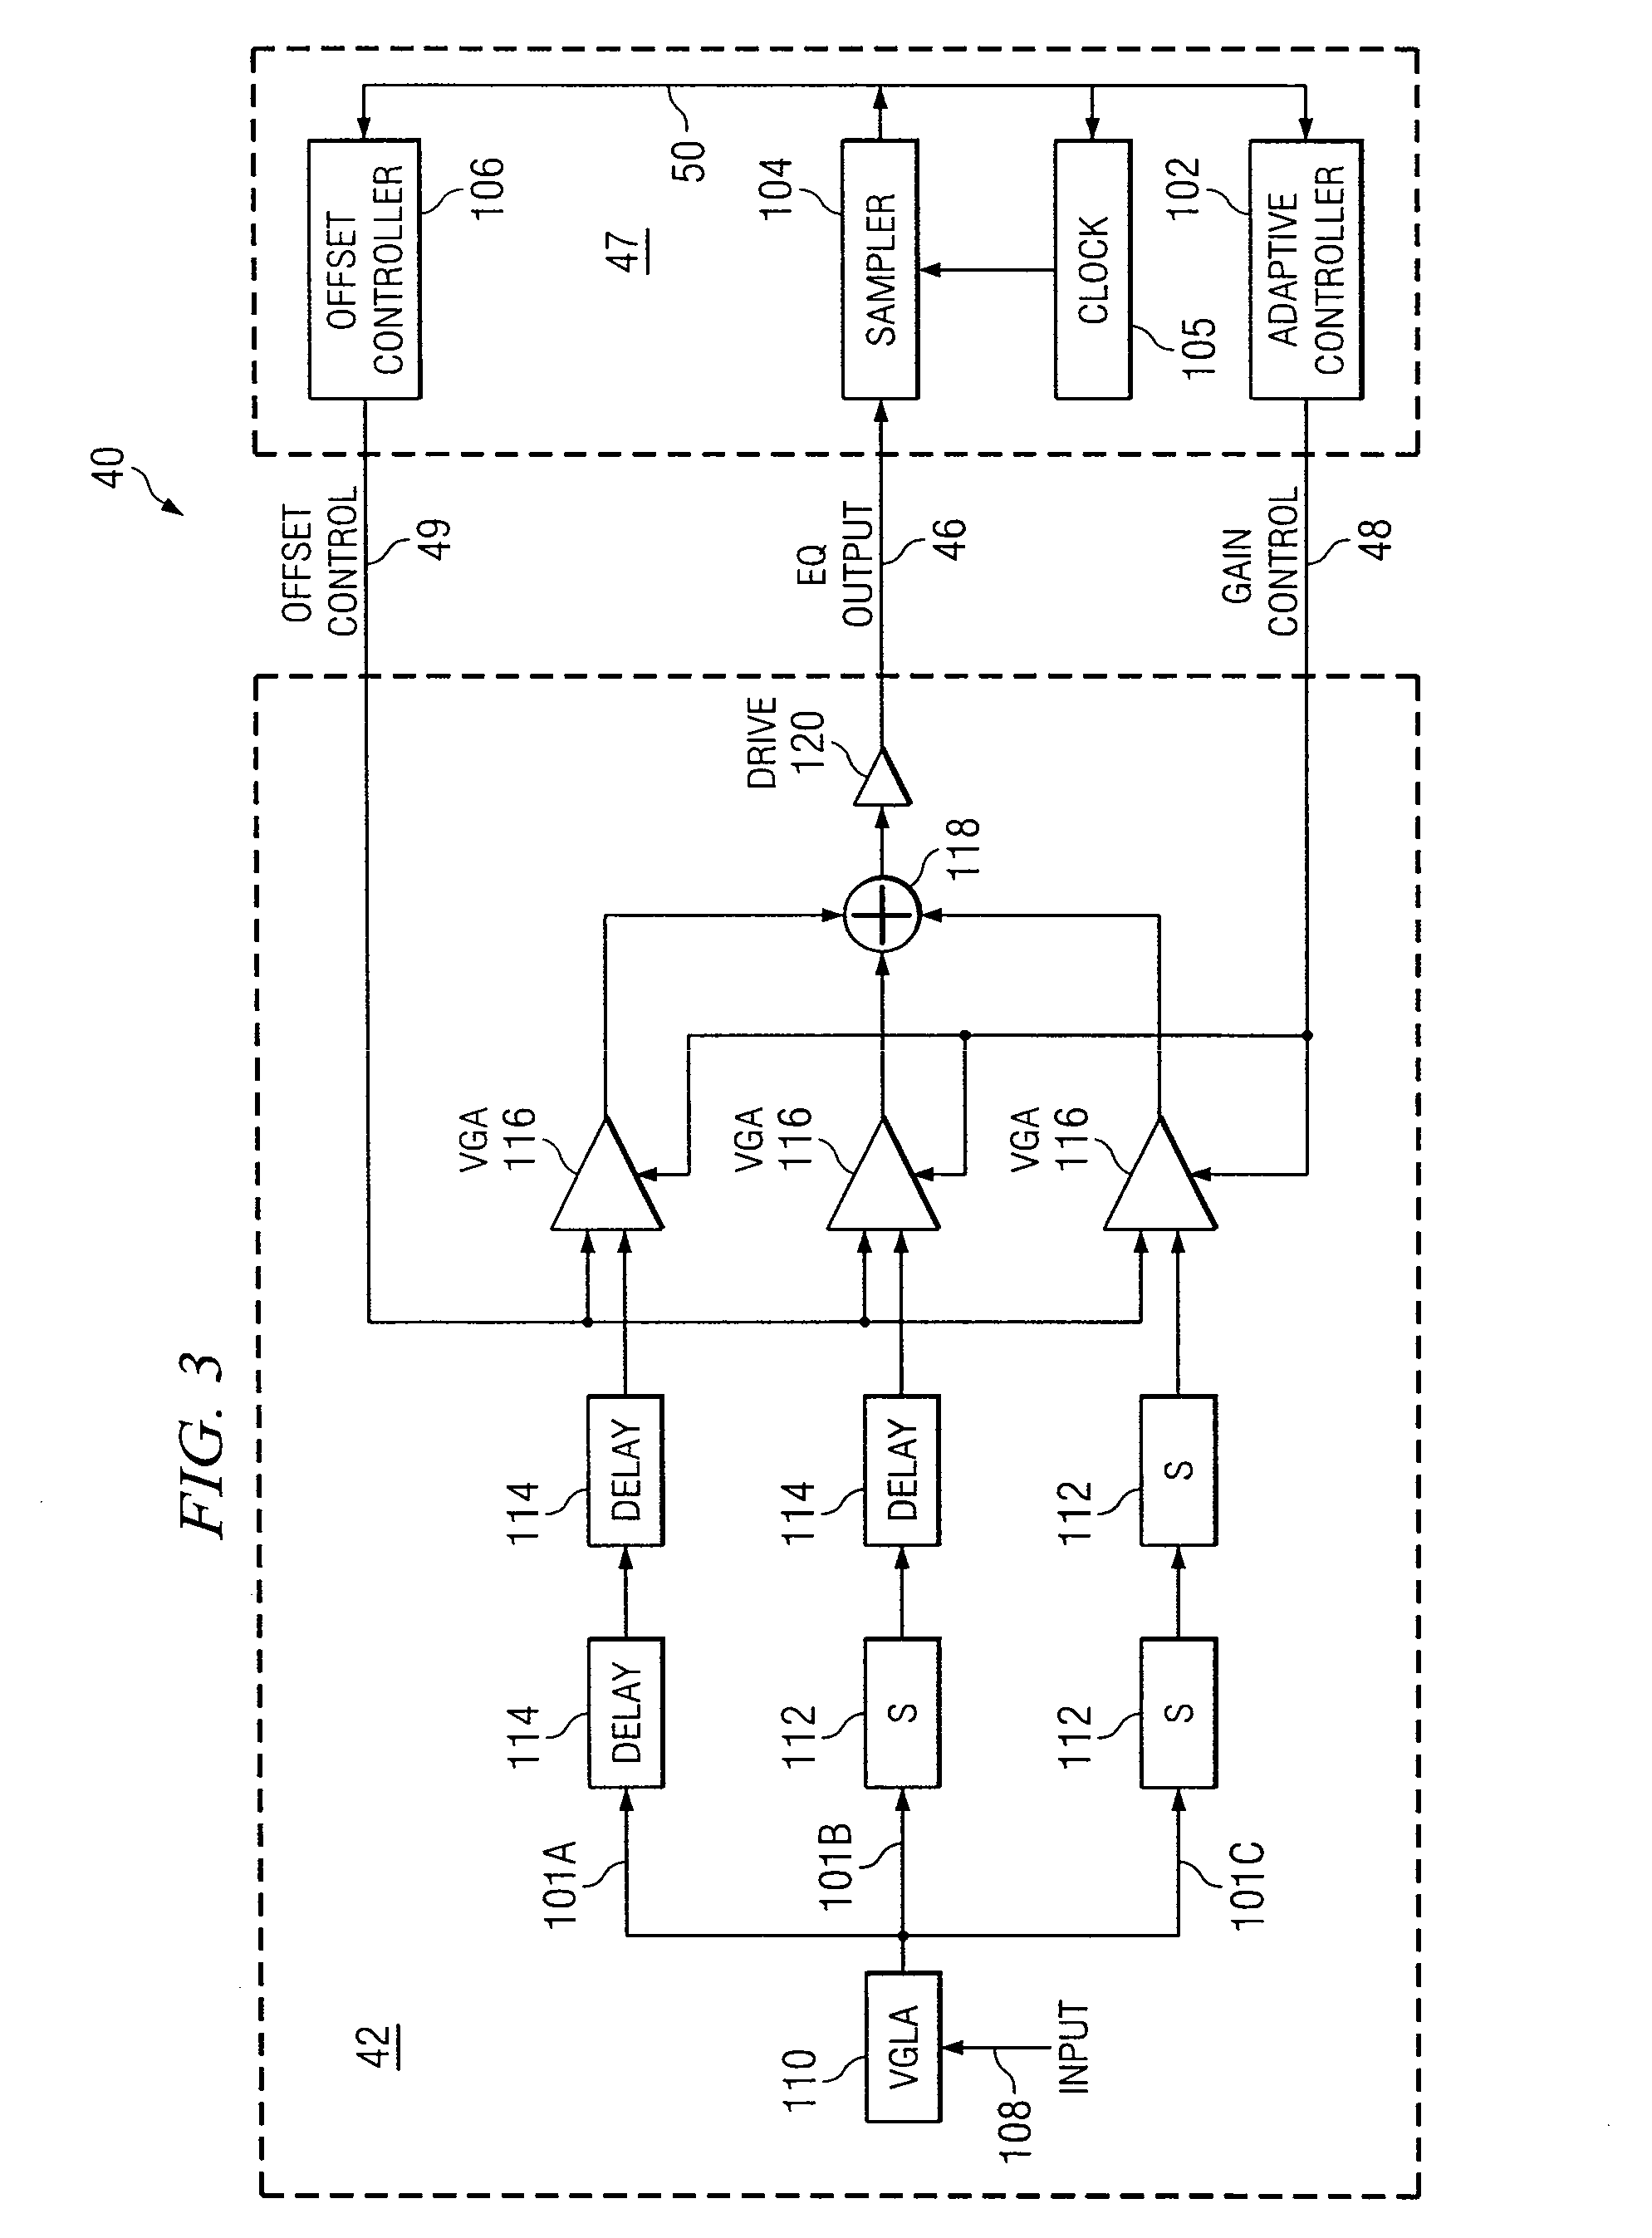 System and Method for Decoupling Multiple Control Loops